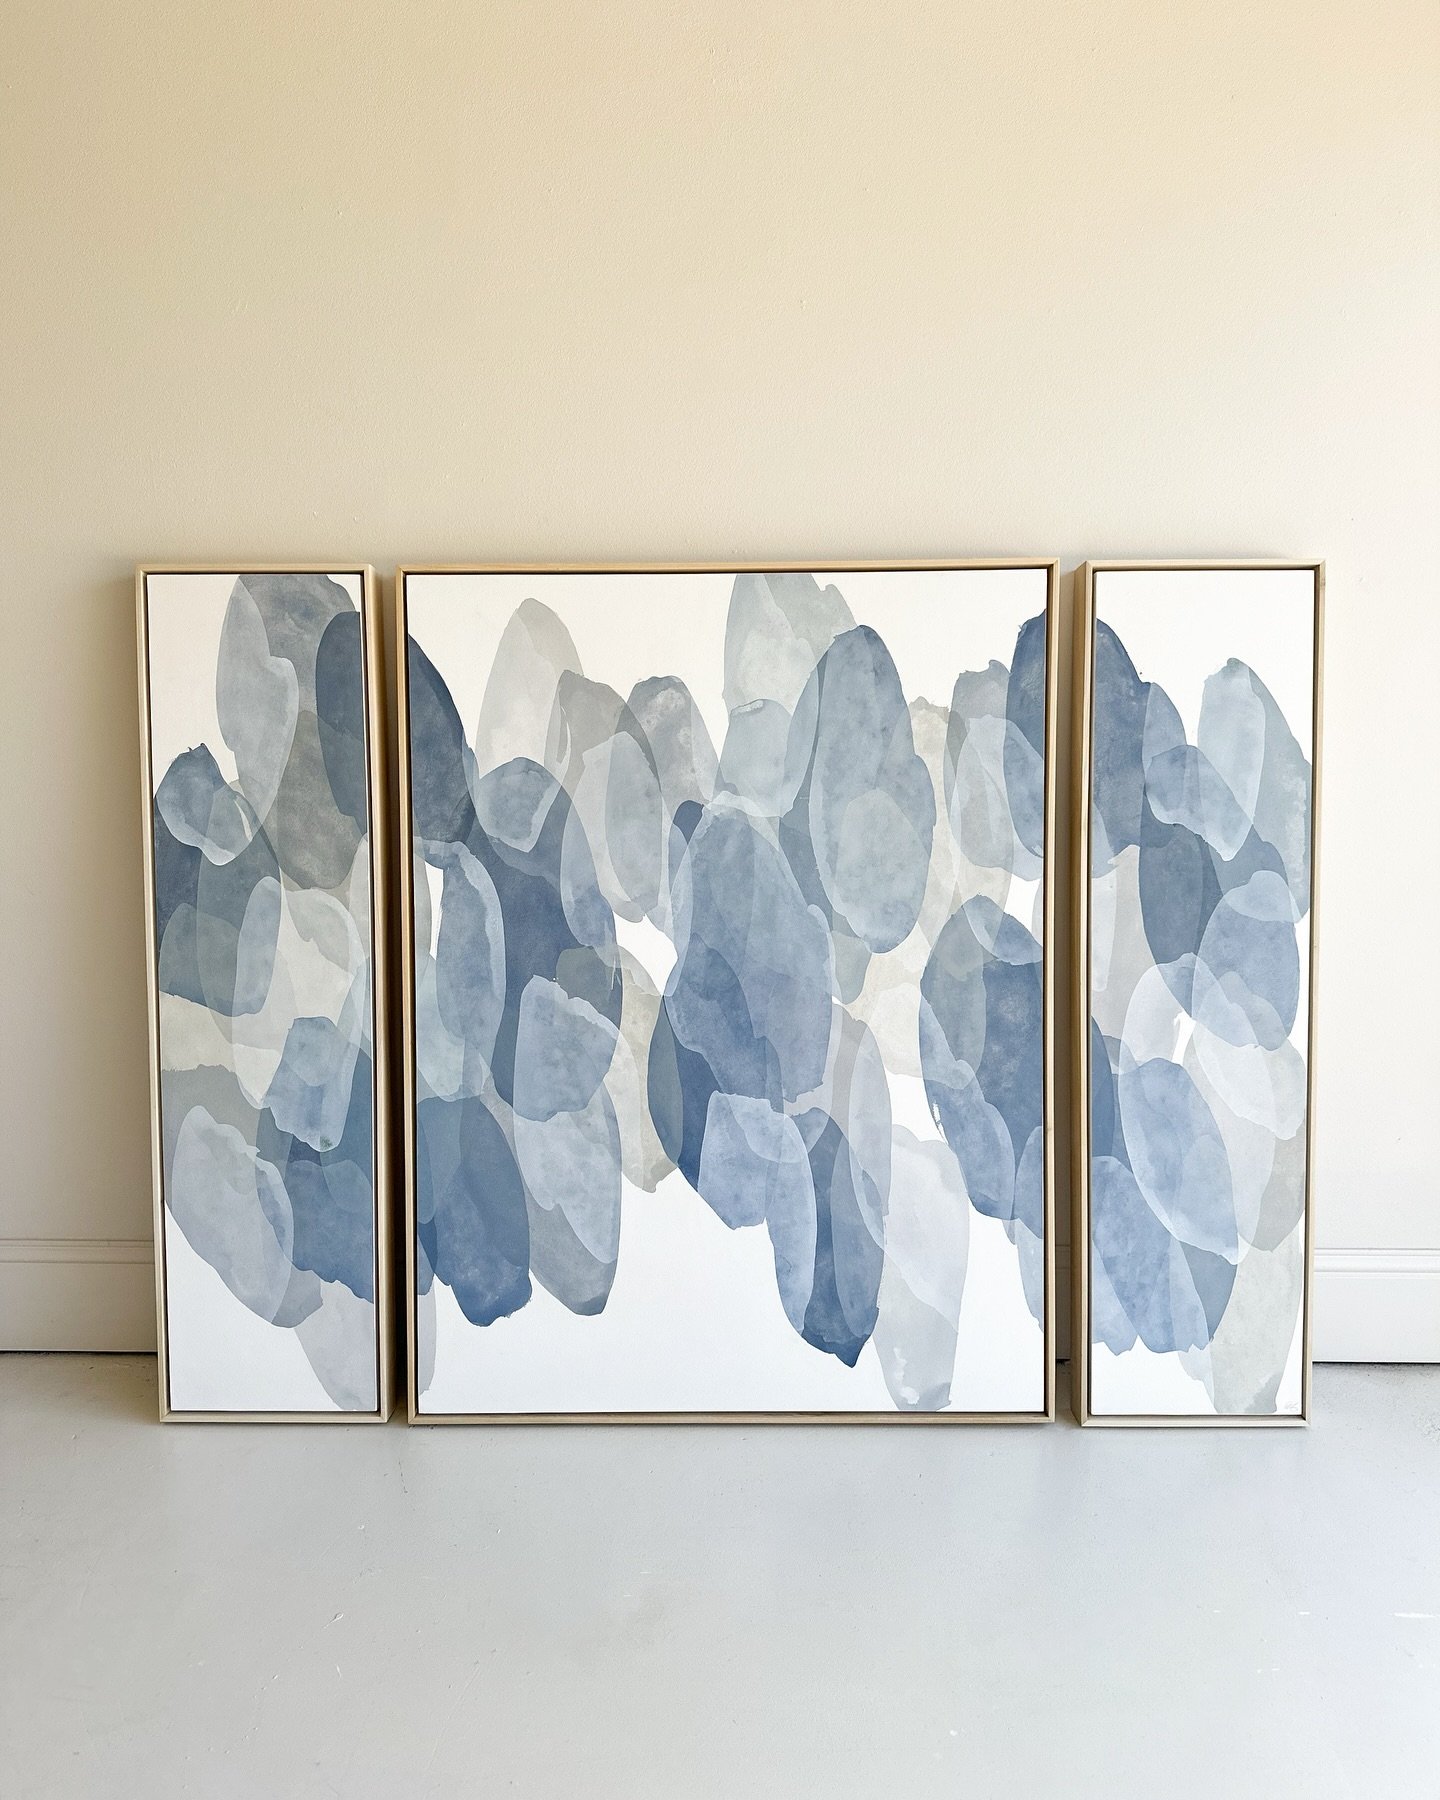 &ldquo;In Seventh Heaven&rdquo; with this gorgeous new triptych, now available at @magiccityartconnection in Birmingham, AL! This size is so popular for those above the bed pieces or dining rooms. Totaling 48x65&rdquo; this piece works perfect on any